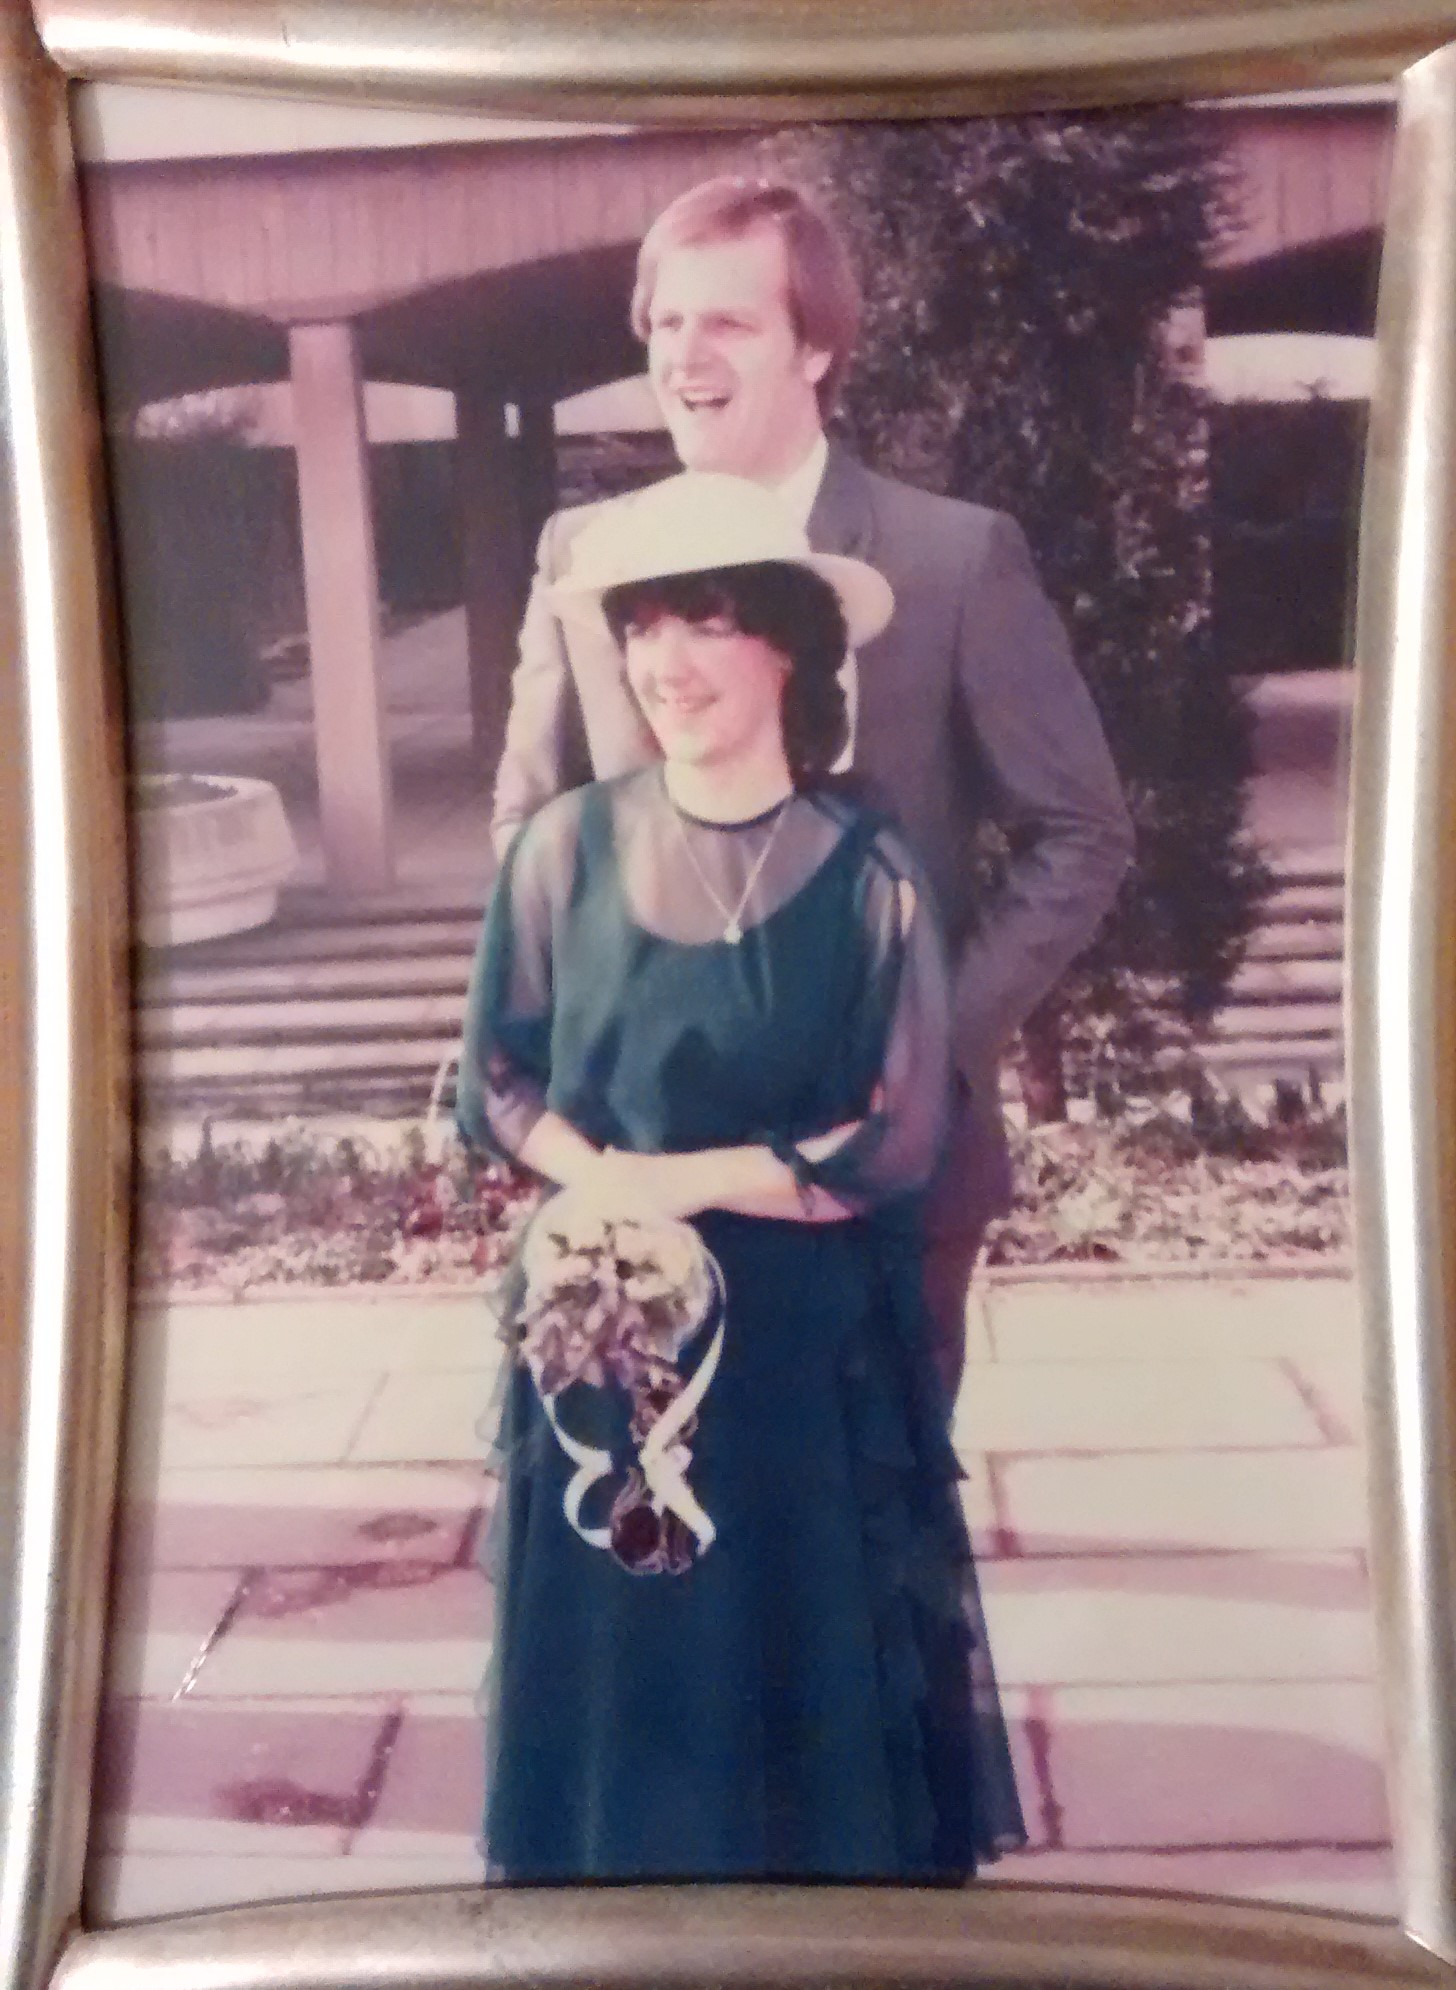 Linda and her husband at their wedding